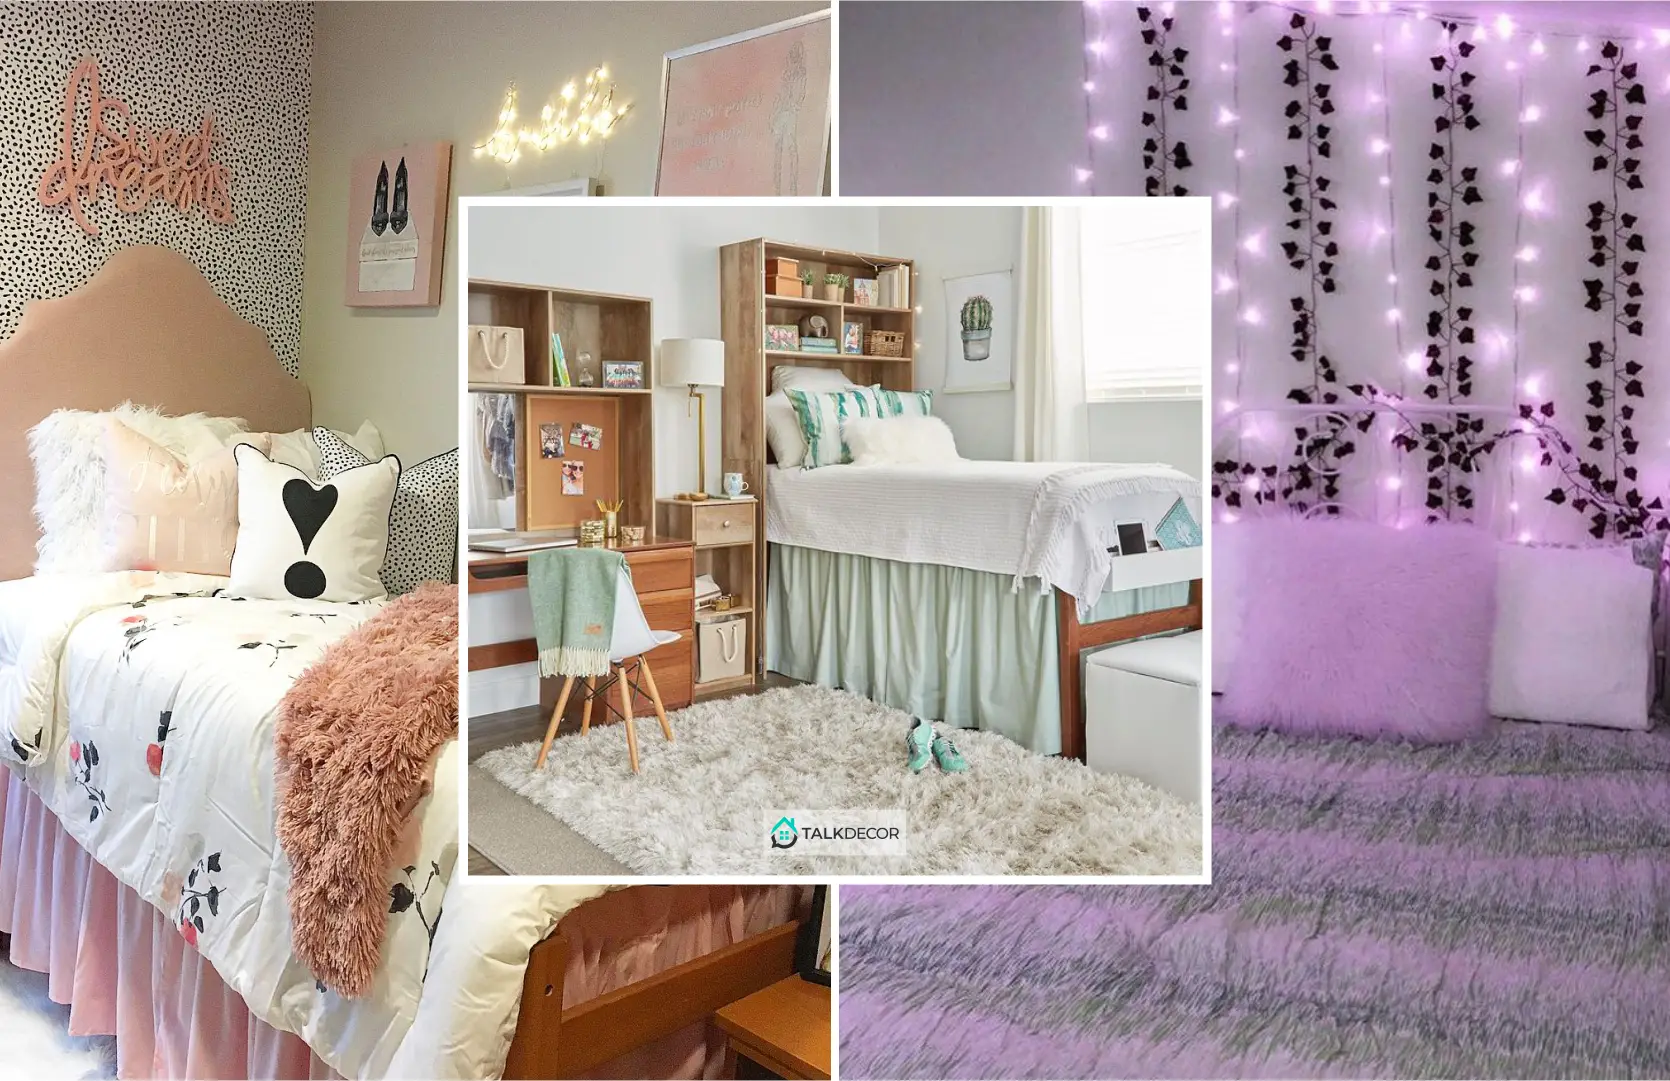 25 Ideas to Make Your Dorm Room Cozy during Winter